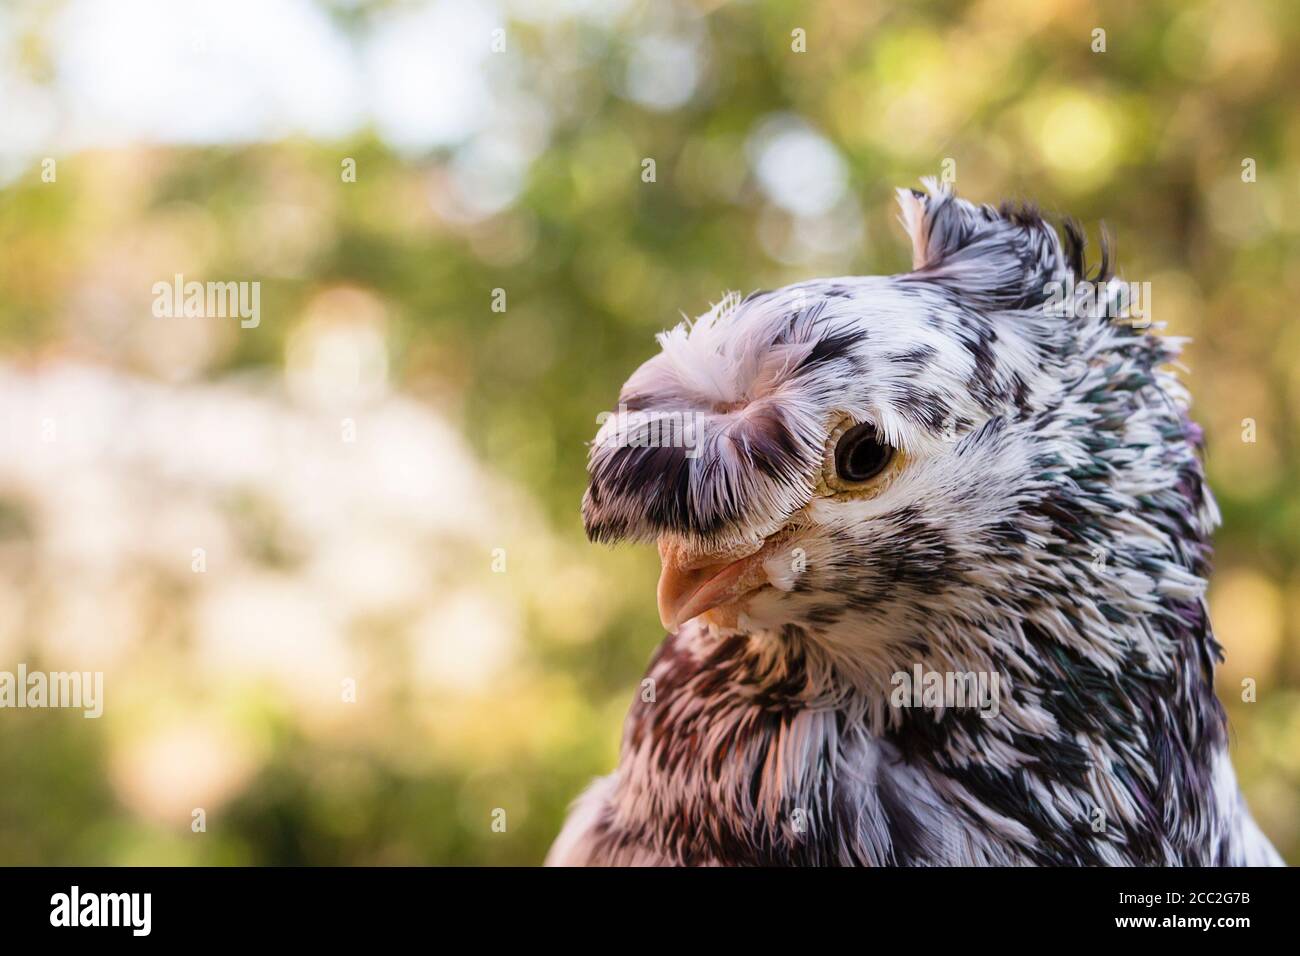 English Fantail pigeon closeup, the background is blurred. Stock Photo